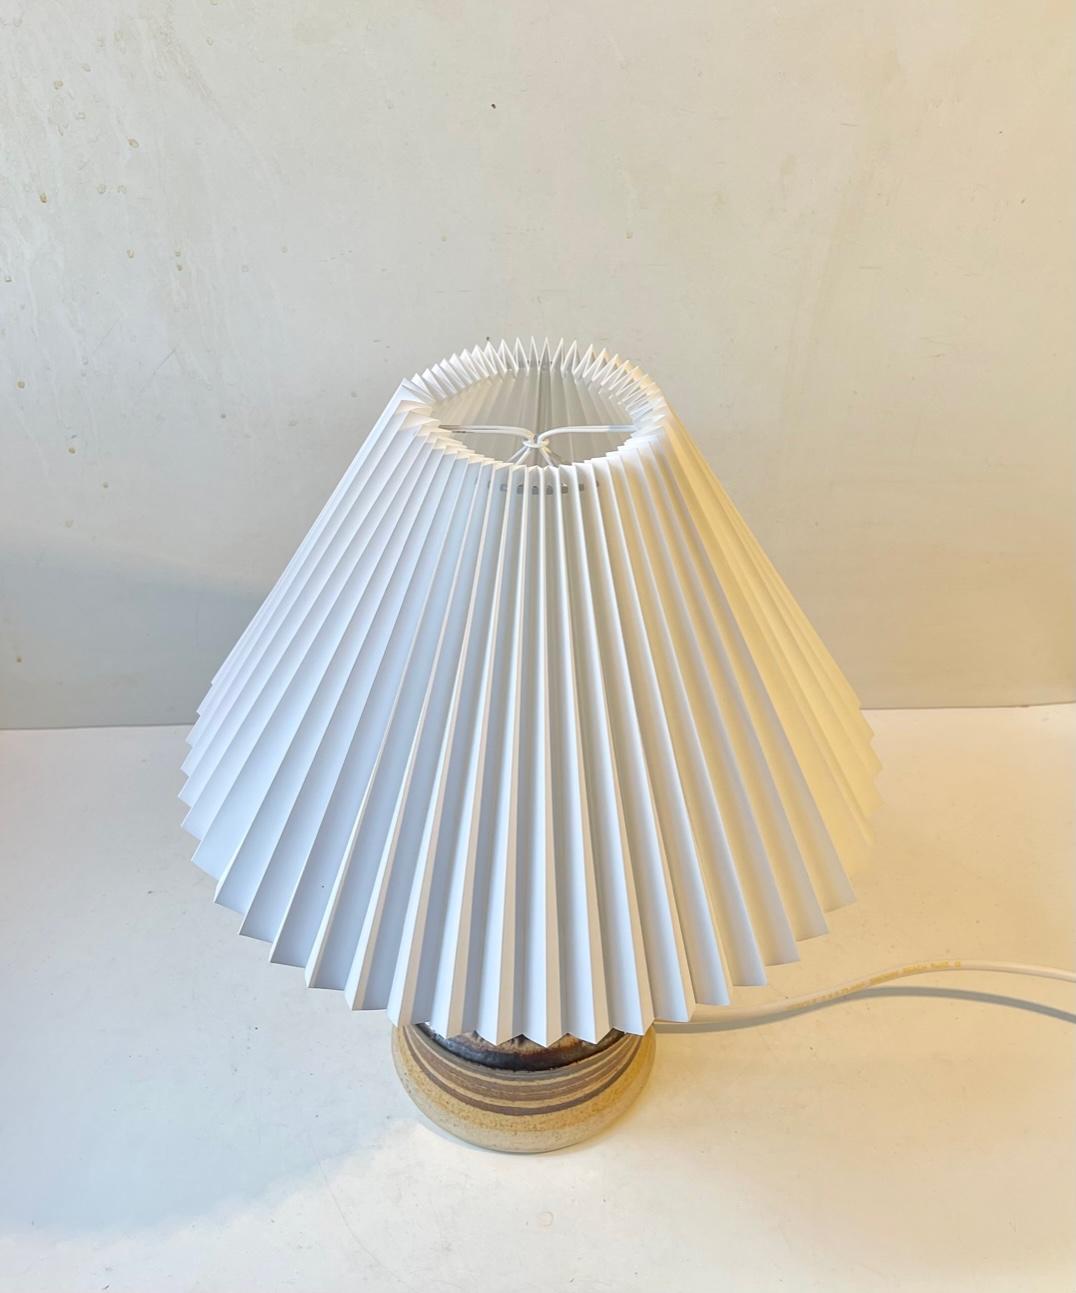 Italian Modern Table Lamp in Ceramic with Earthy Glaze Stripes, 1970s For Sale 4